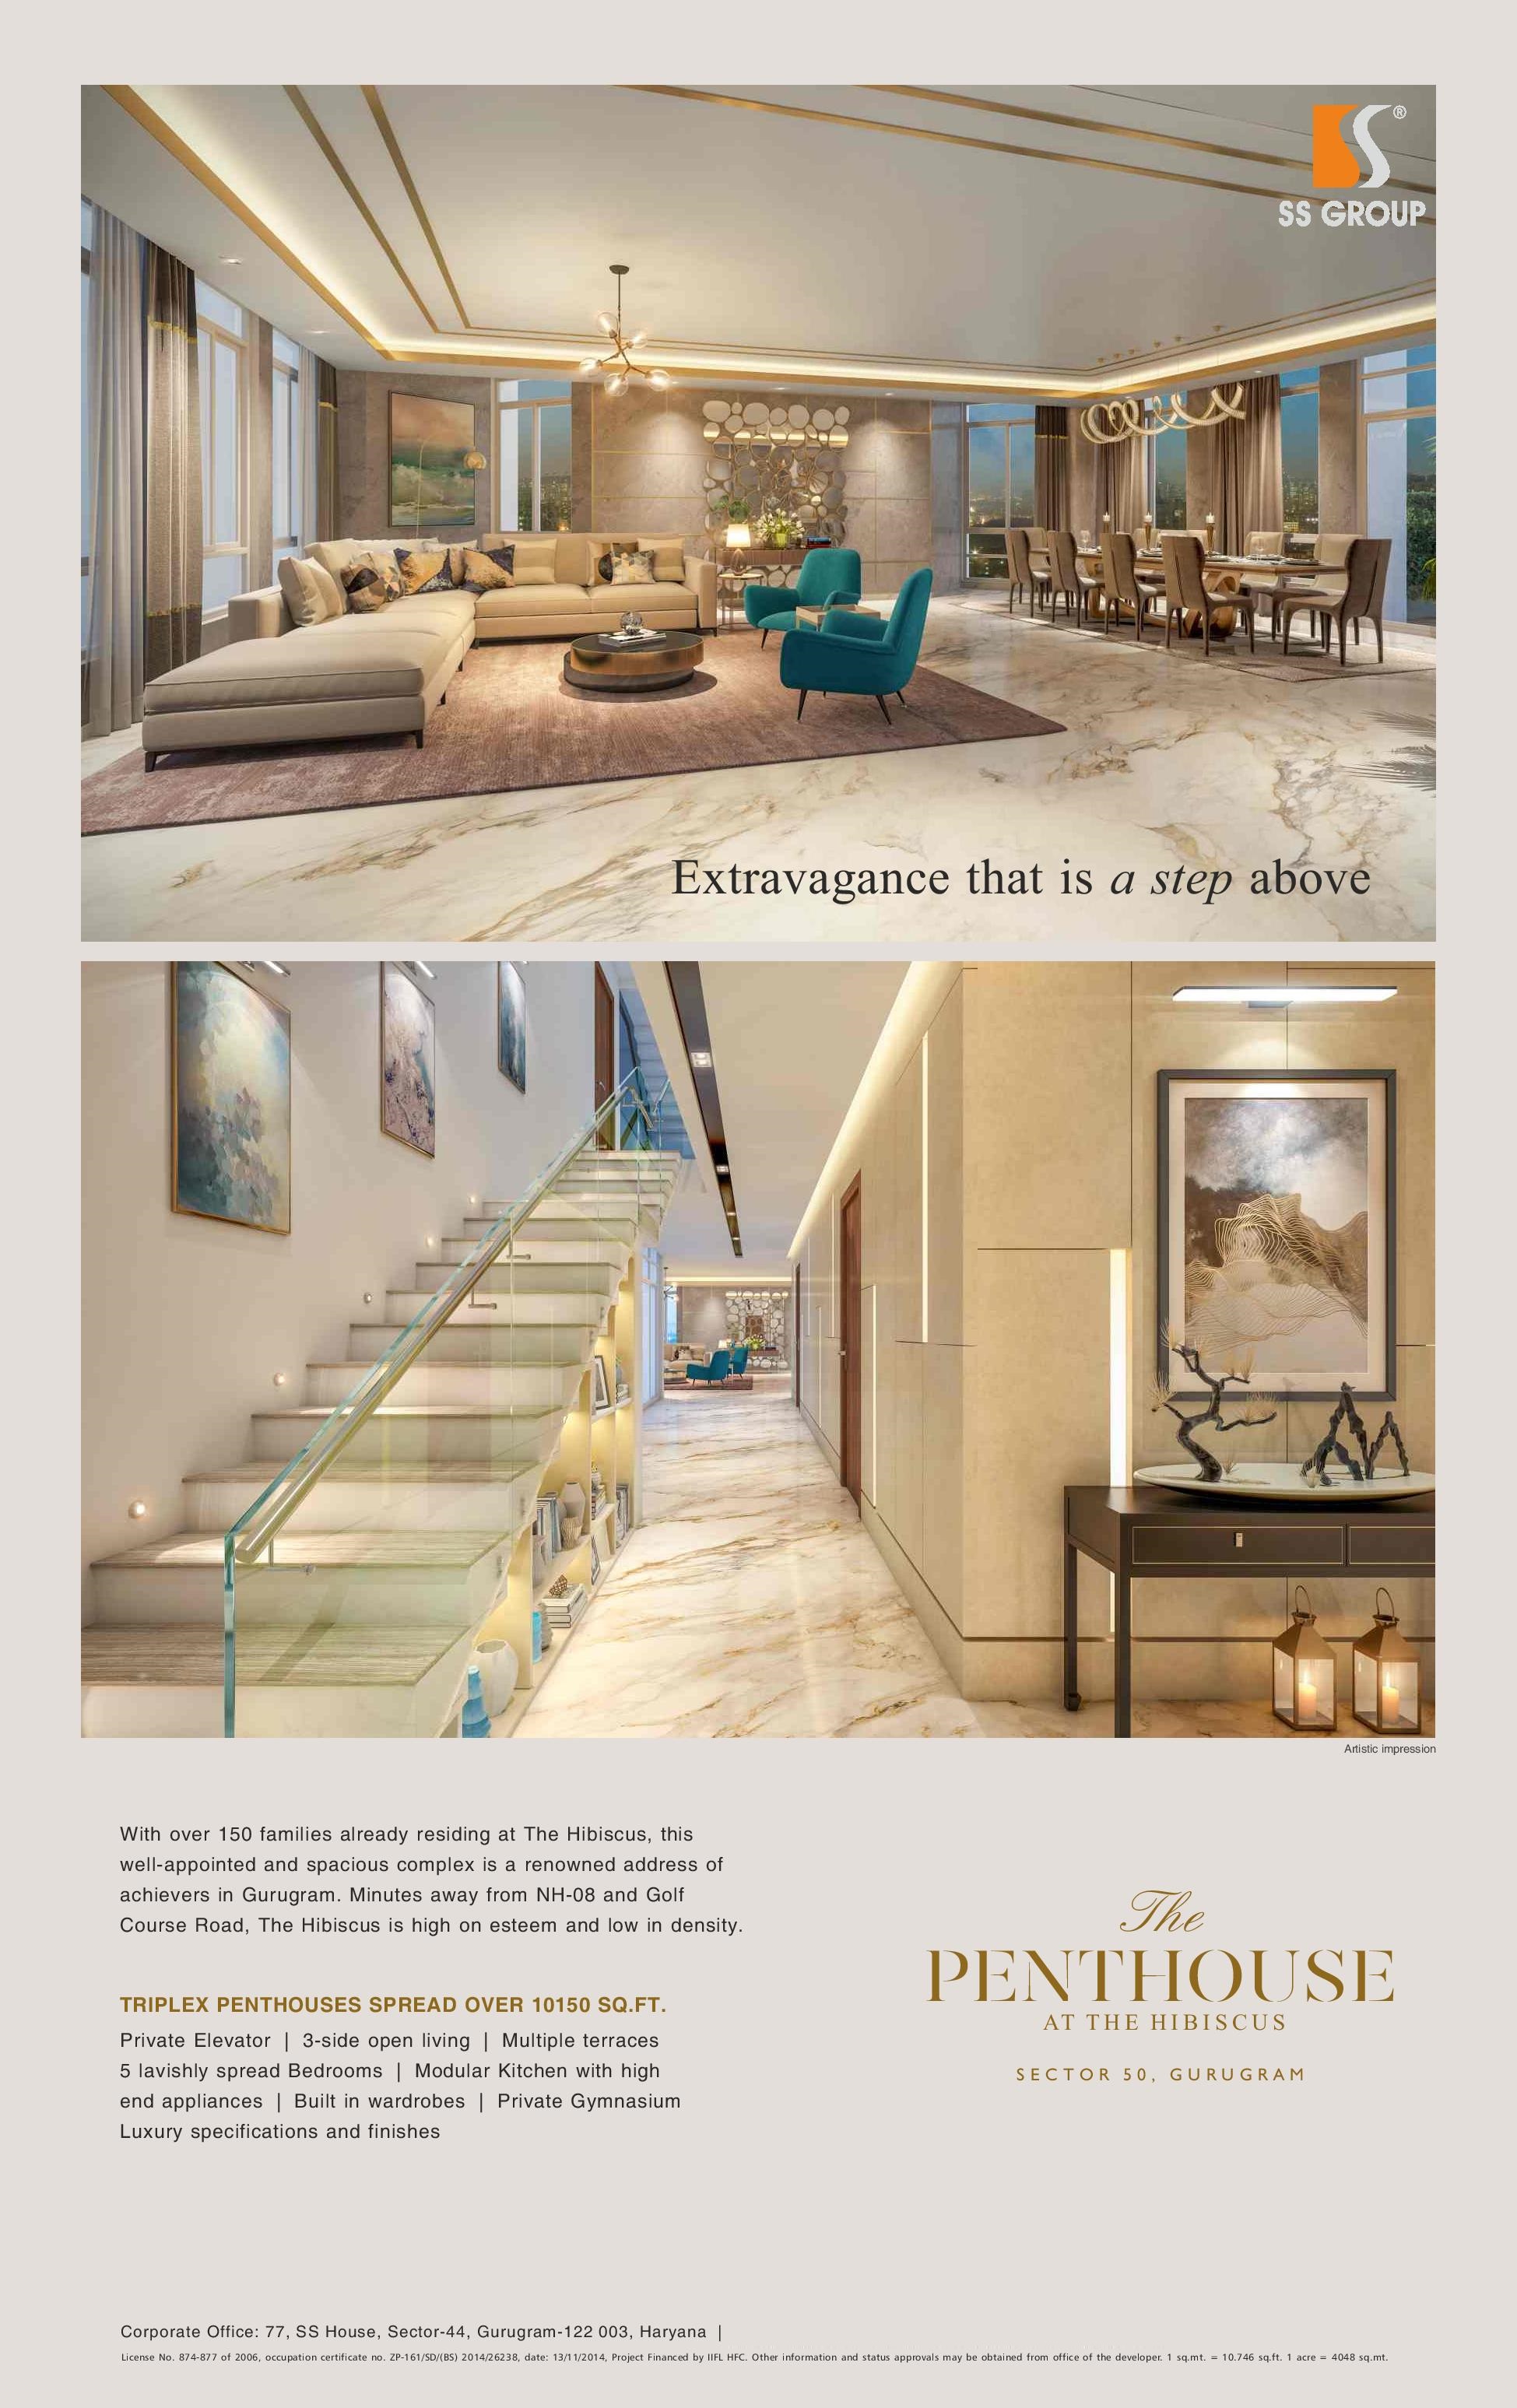 Book 5 BHK penthouse Rs 9 Cr at The Penthouse at SS The Hibiscus in Sector 50, Gurgaon Update